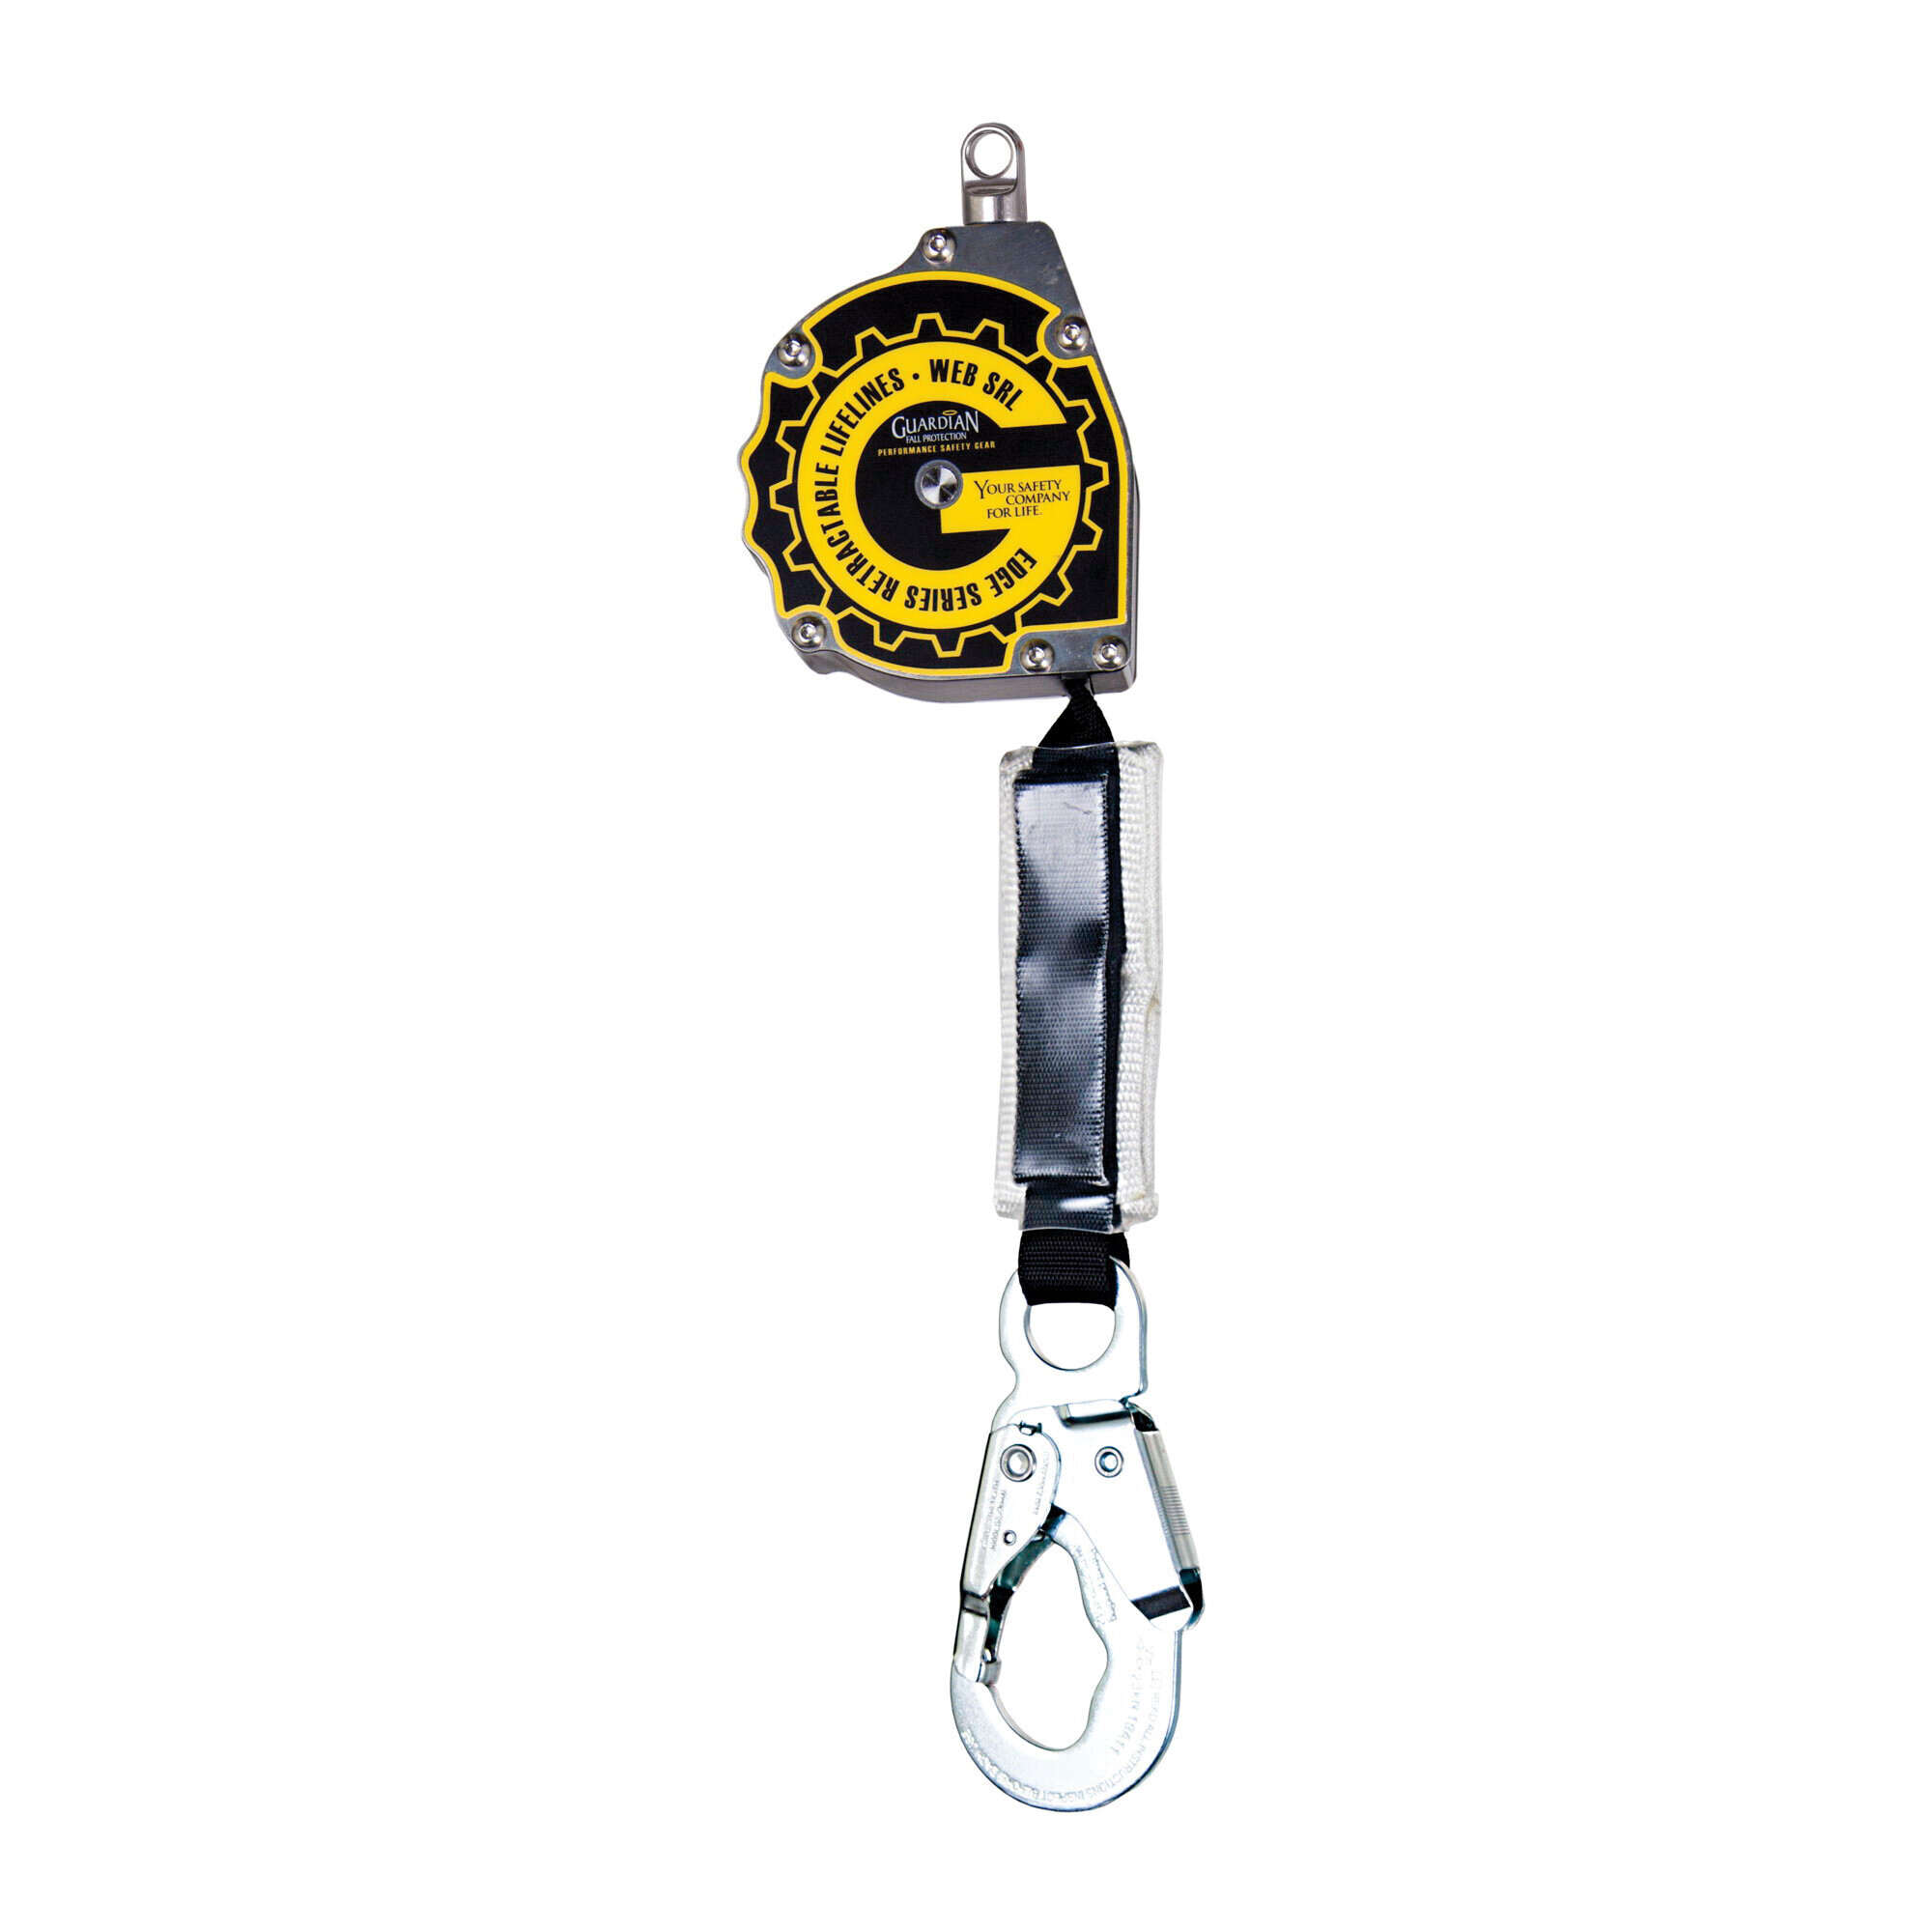 Guardian Fall Protection 10900 Light Weight Retractable Web Lanyard -  130 - 420 lb Load -  11 ft L -  Snap Hook Connection